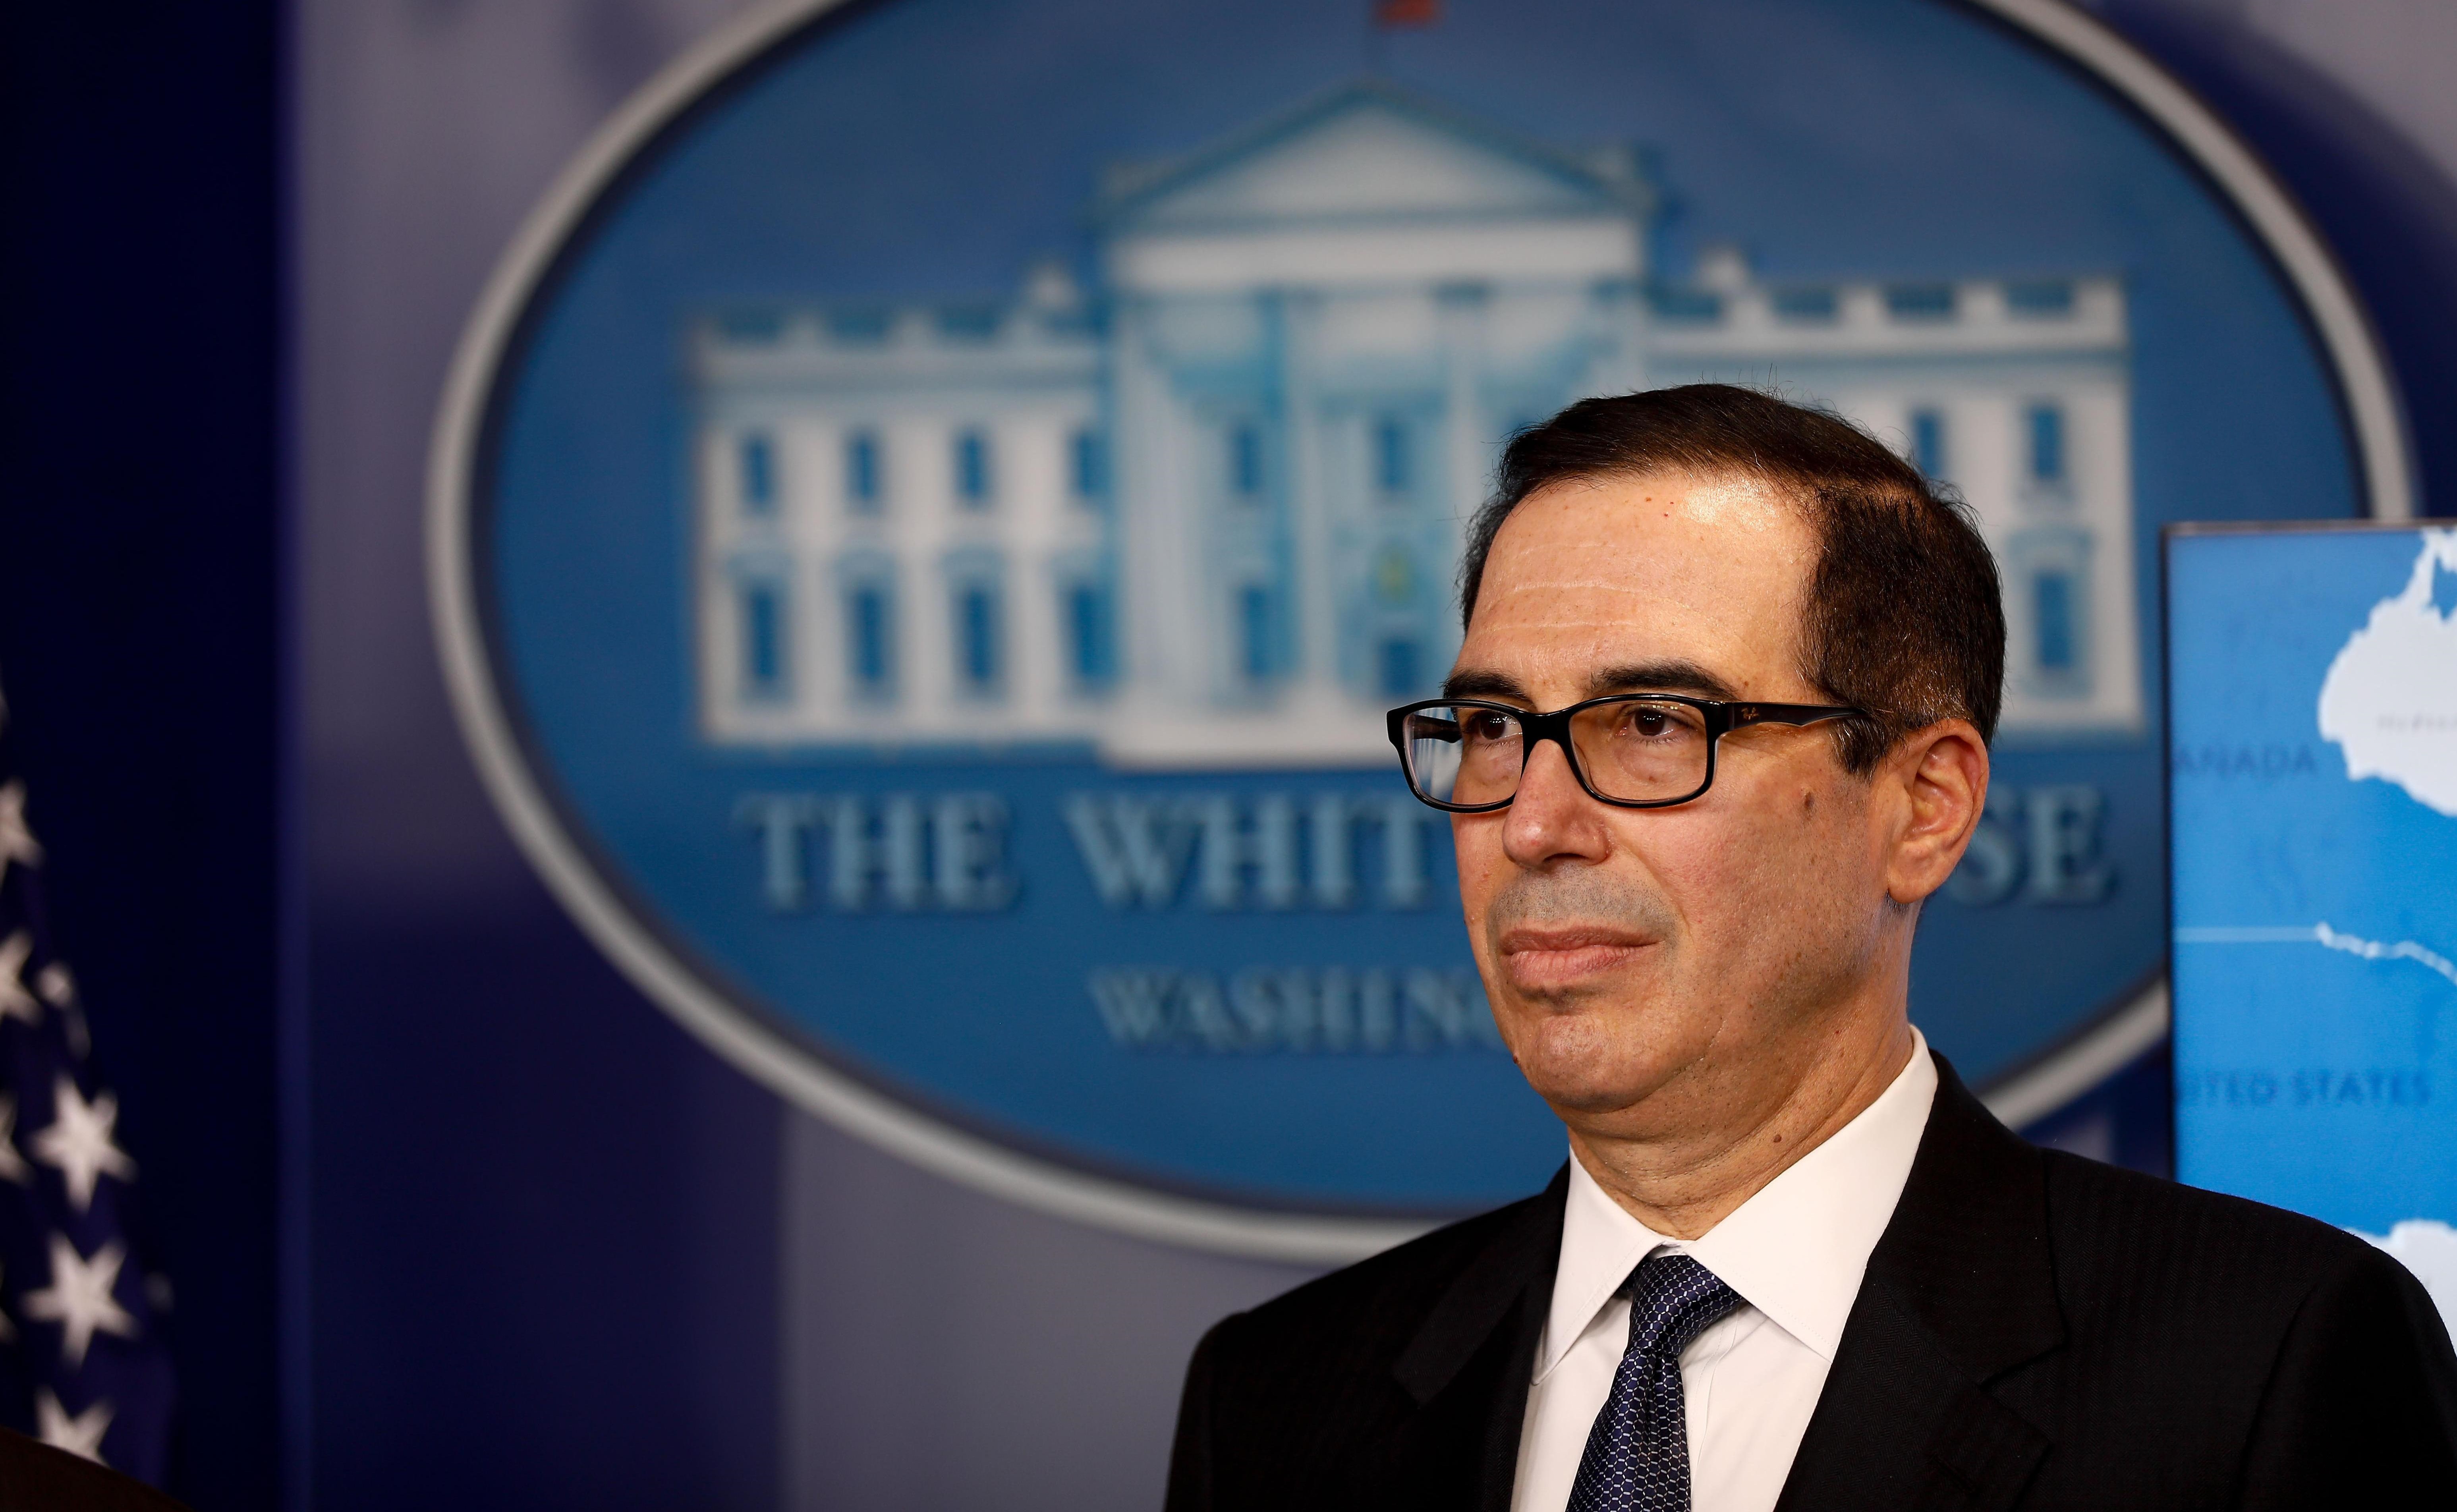 Mnuchin hopes economy will bounce back in 3rd quarter this year as US battles COVID-19 pandemic